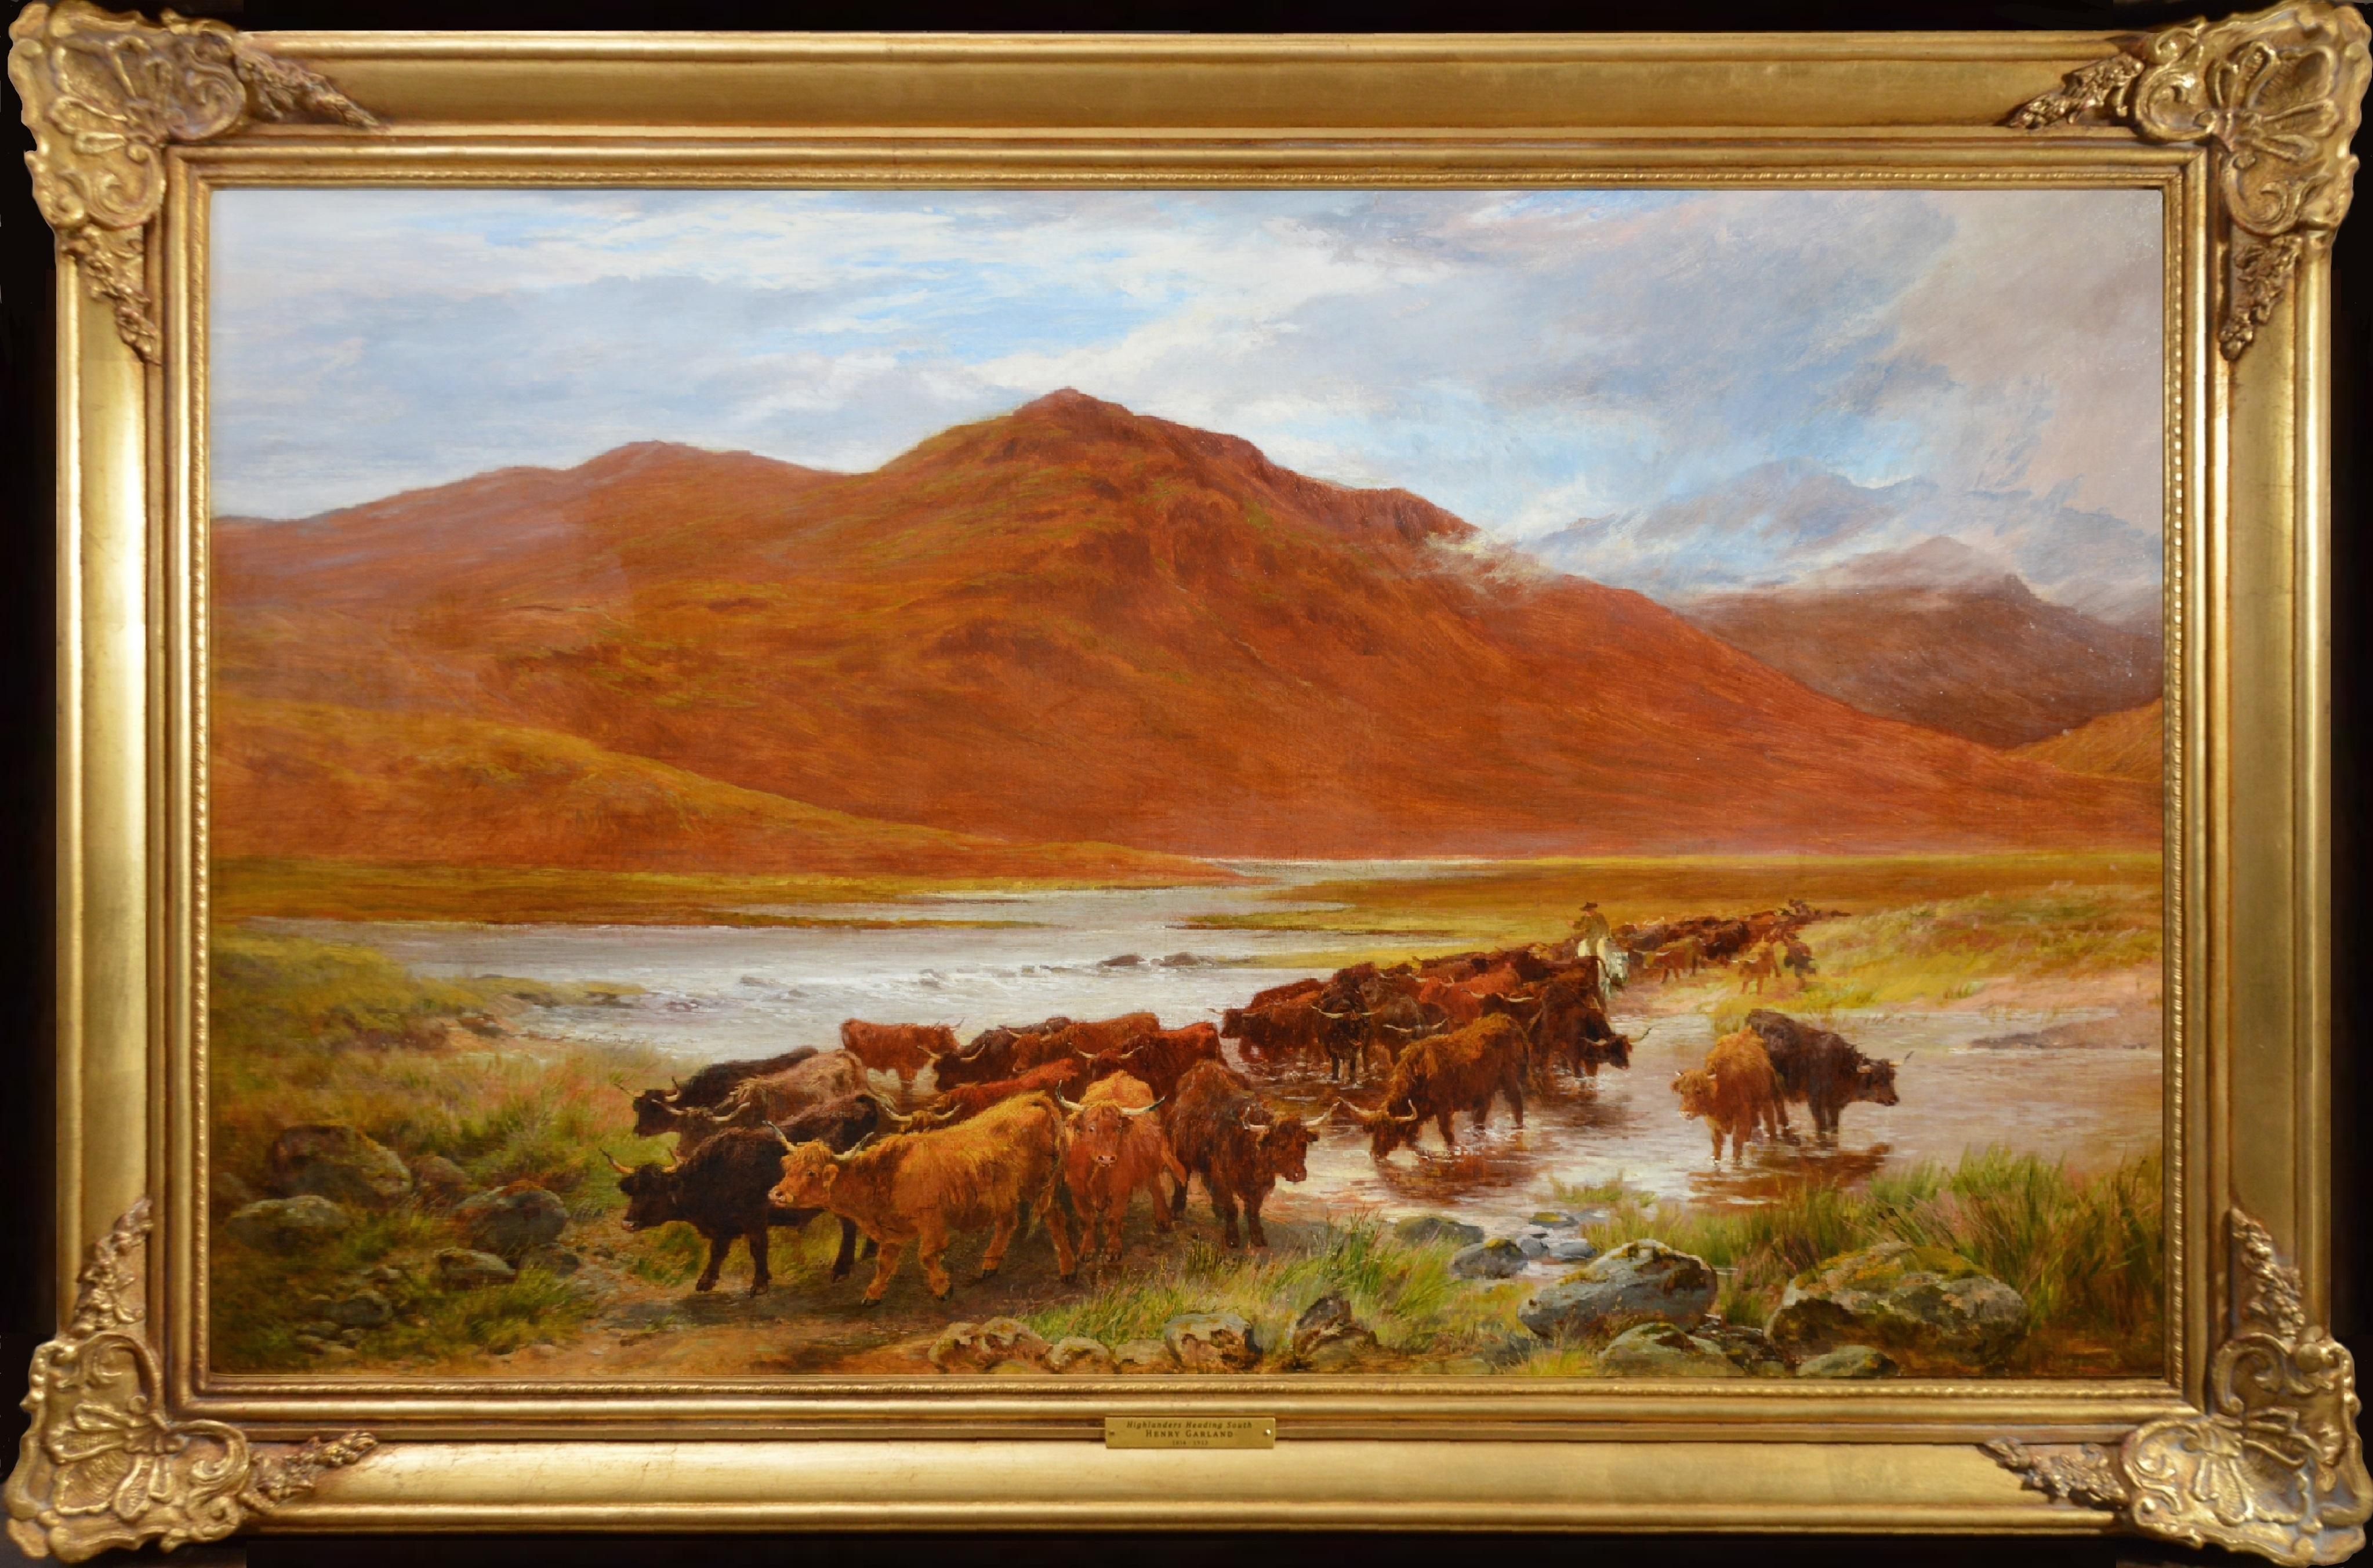 Henry Garland Animal Painting - Highlanders Heading South - Large 19th Century Scottish Highlands Oil Painting